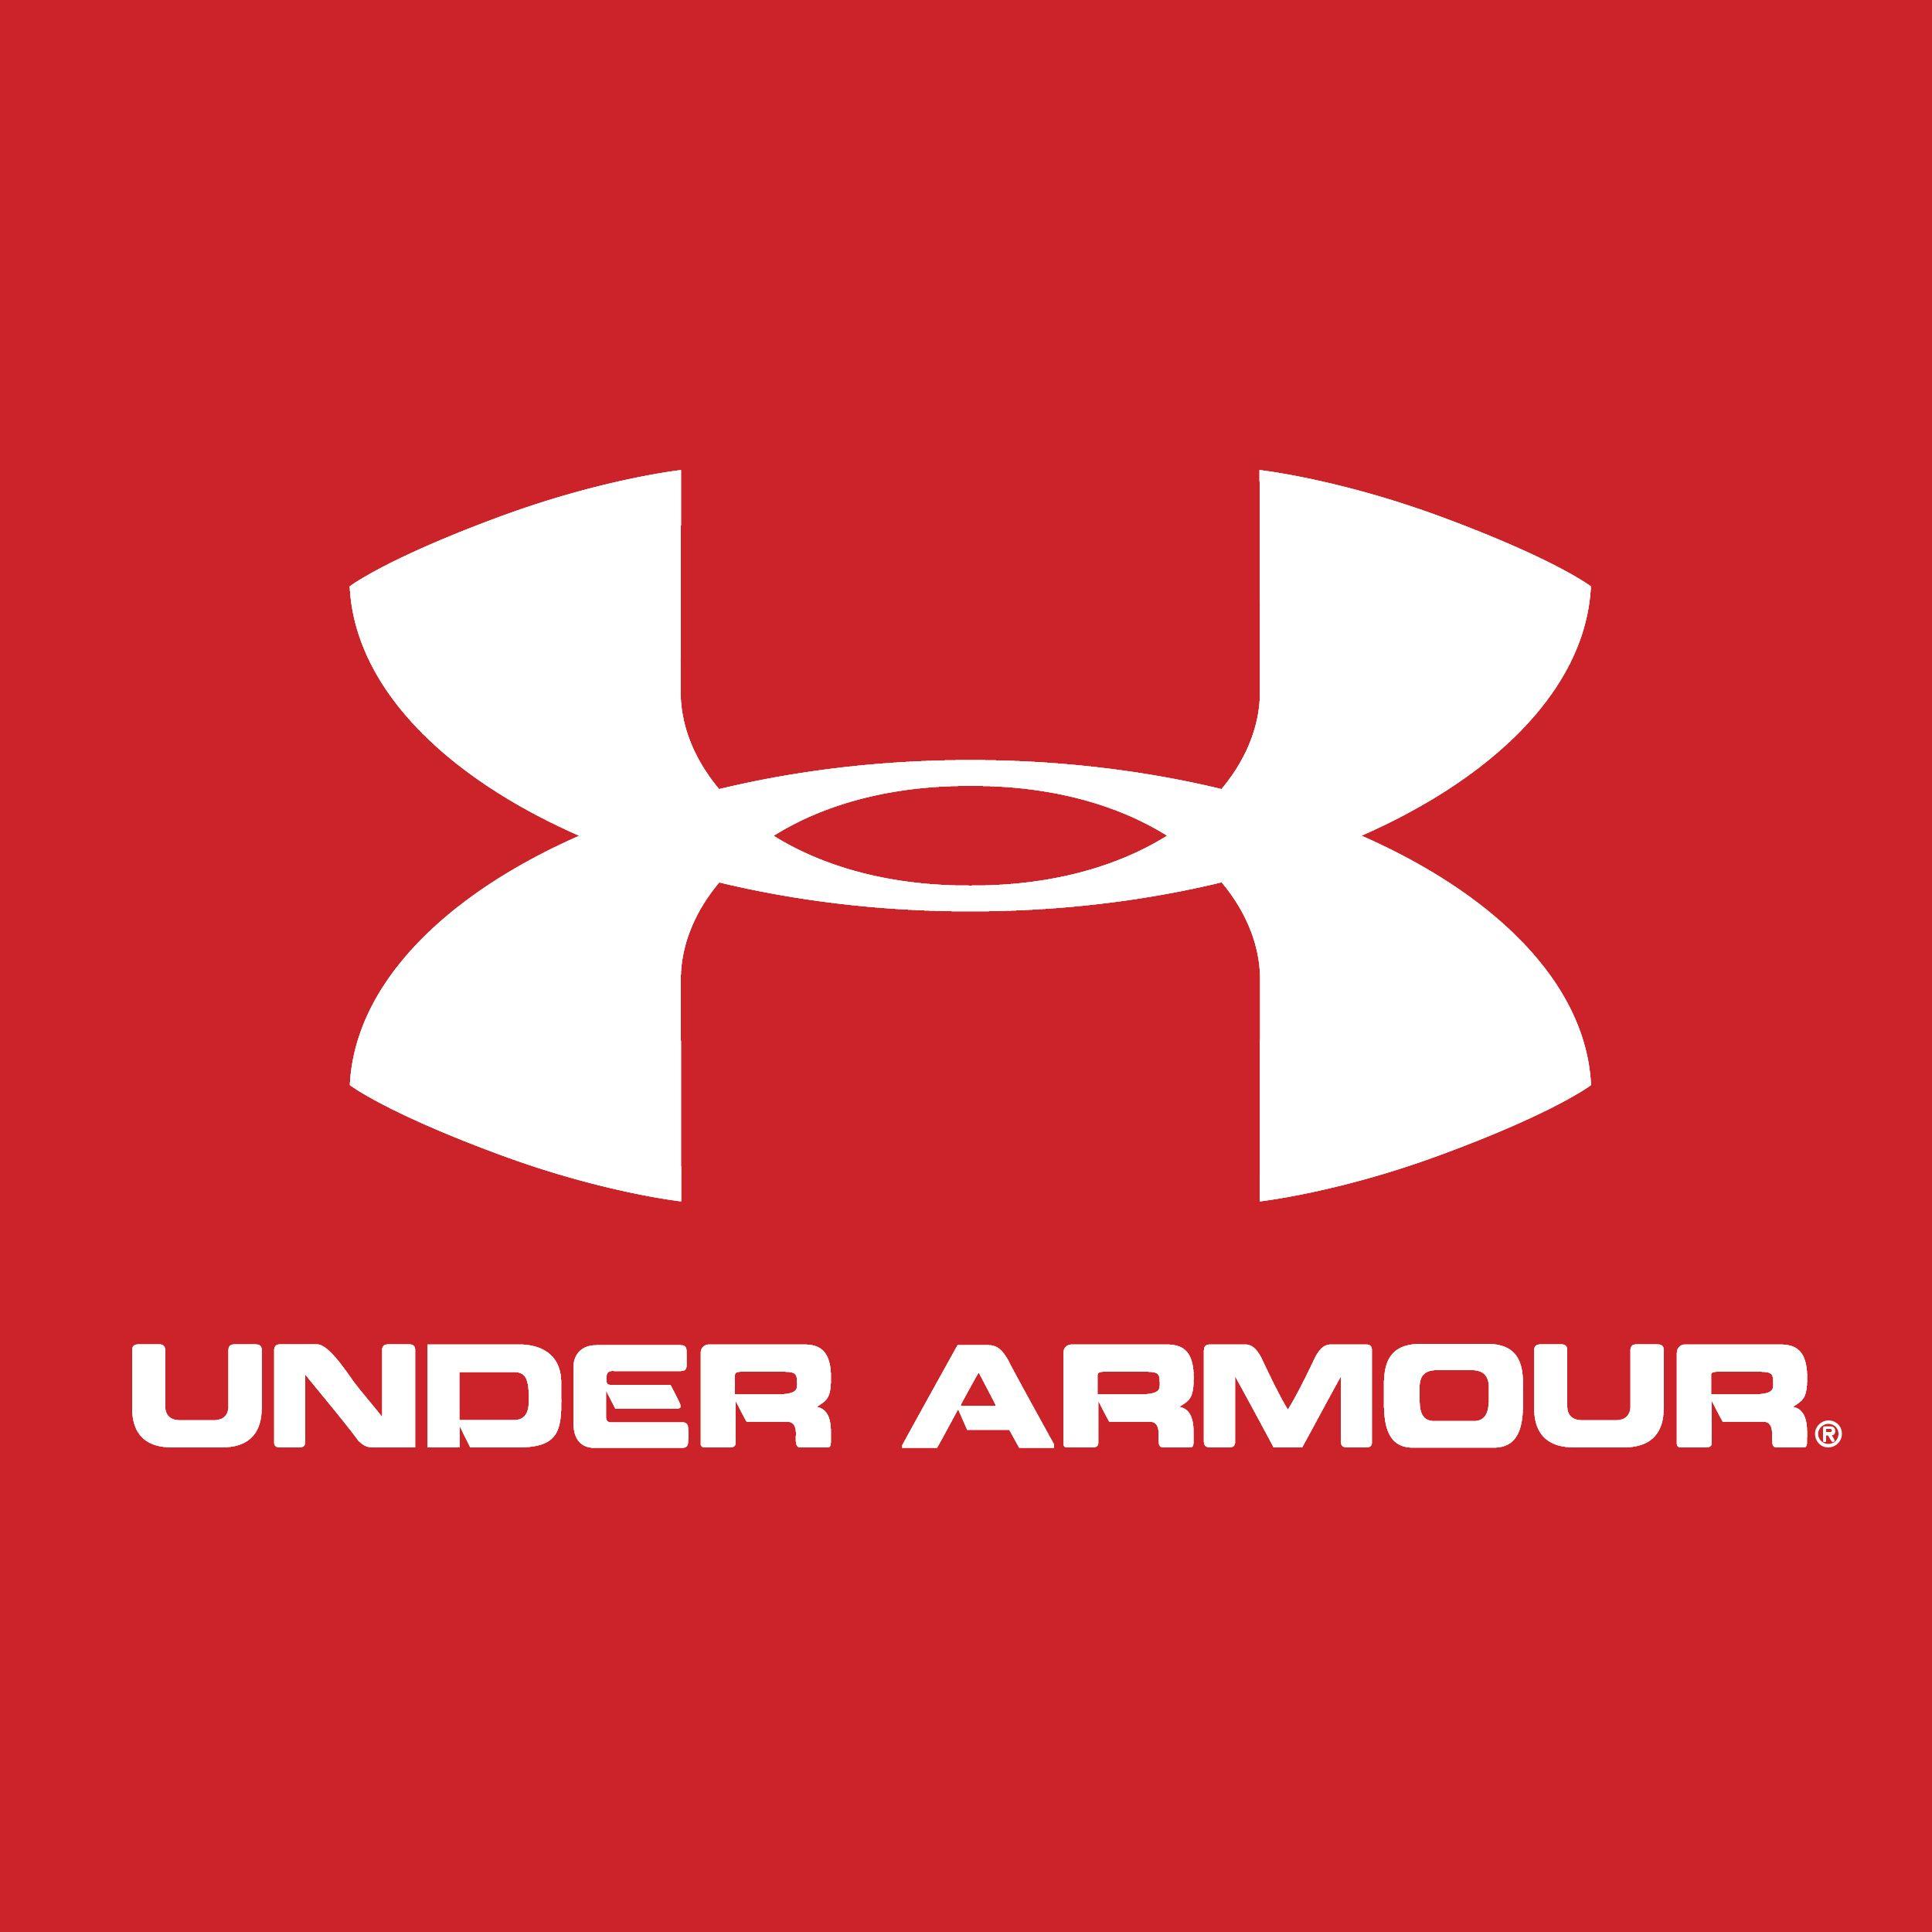 Cool Red and Blue Under Armour Logo - Amazon.com: Under Armour